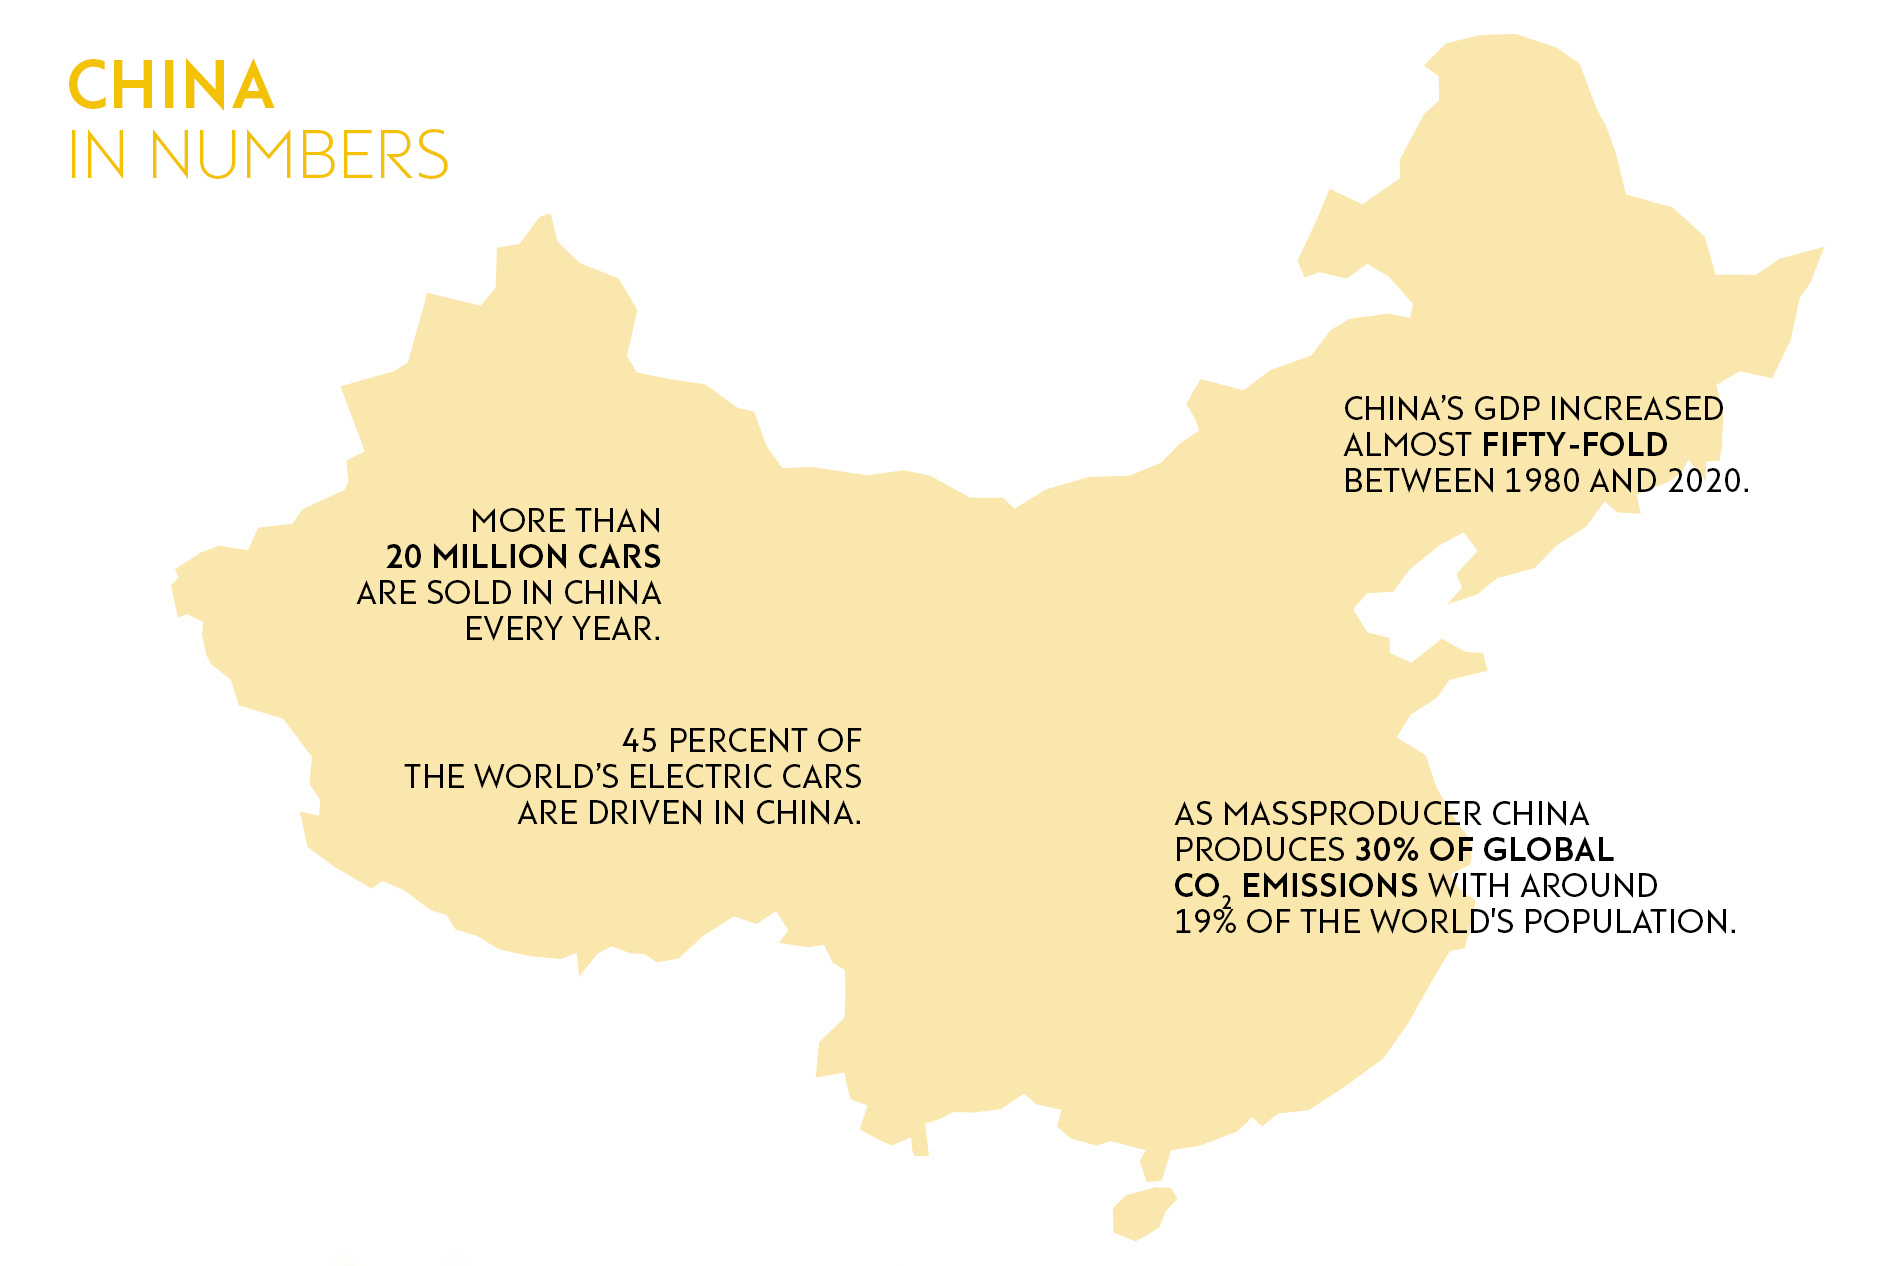 China in numbers